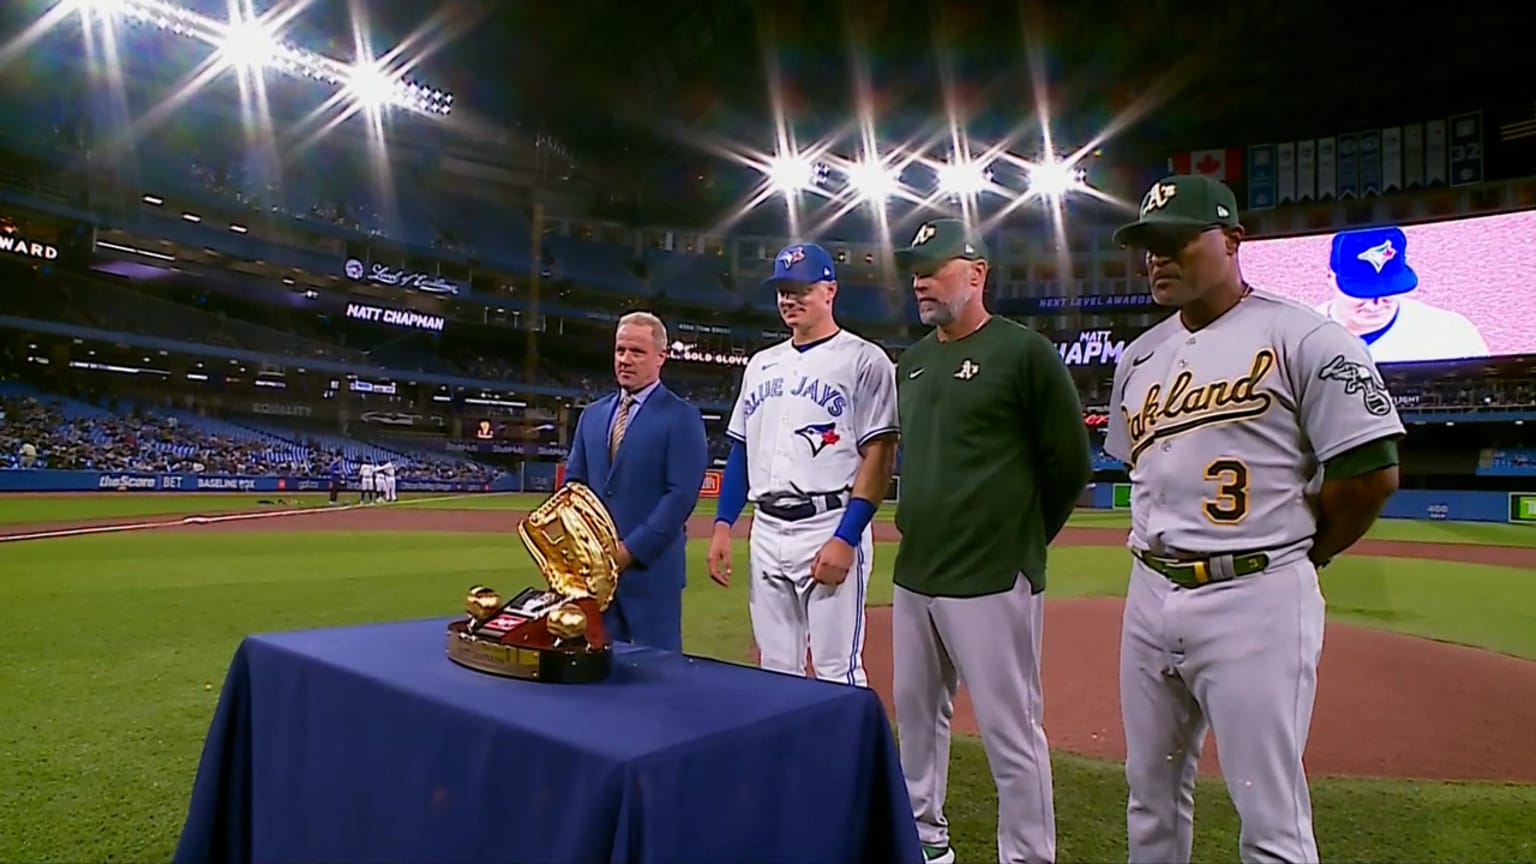 Chapman receives his Gold Glove, 04/16/2022